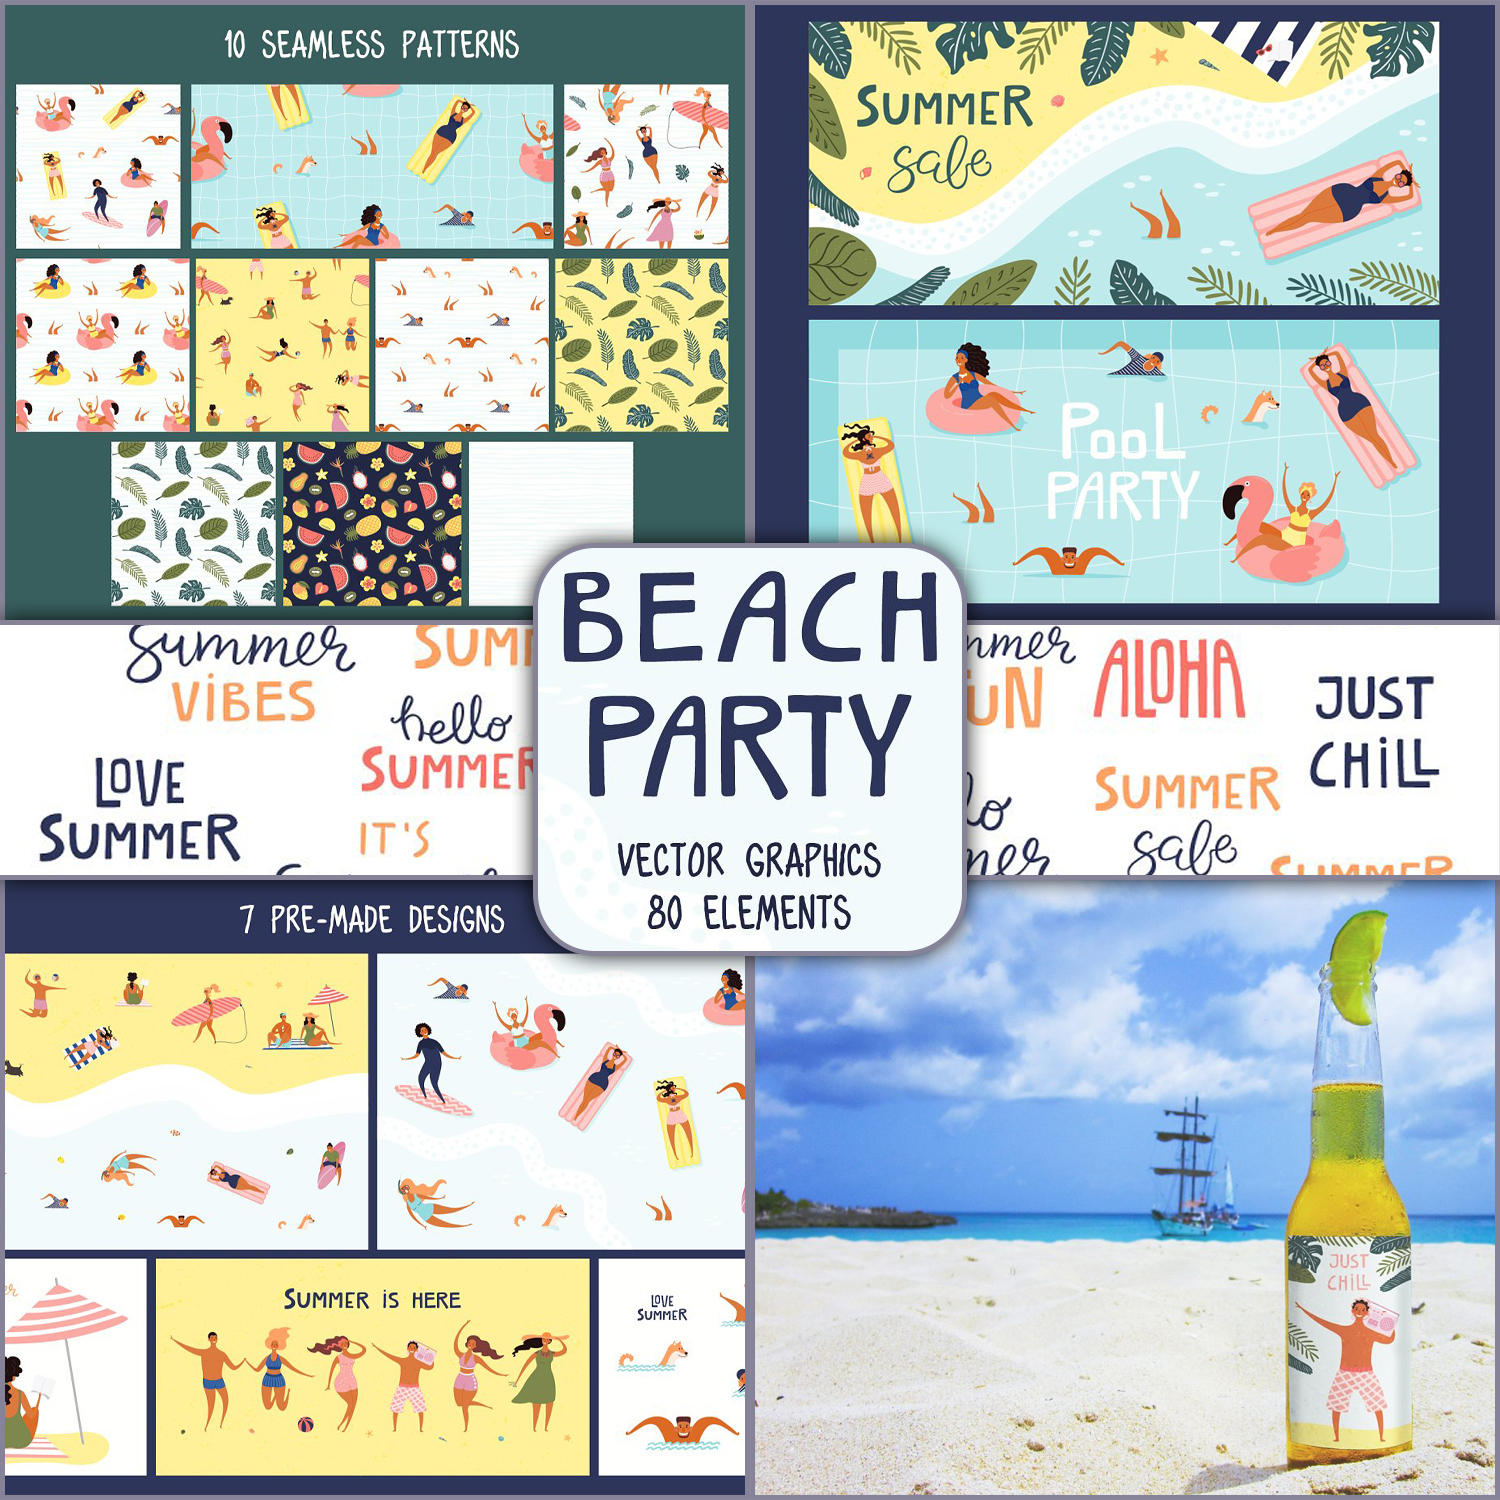 The beach party is shown in the pictures.